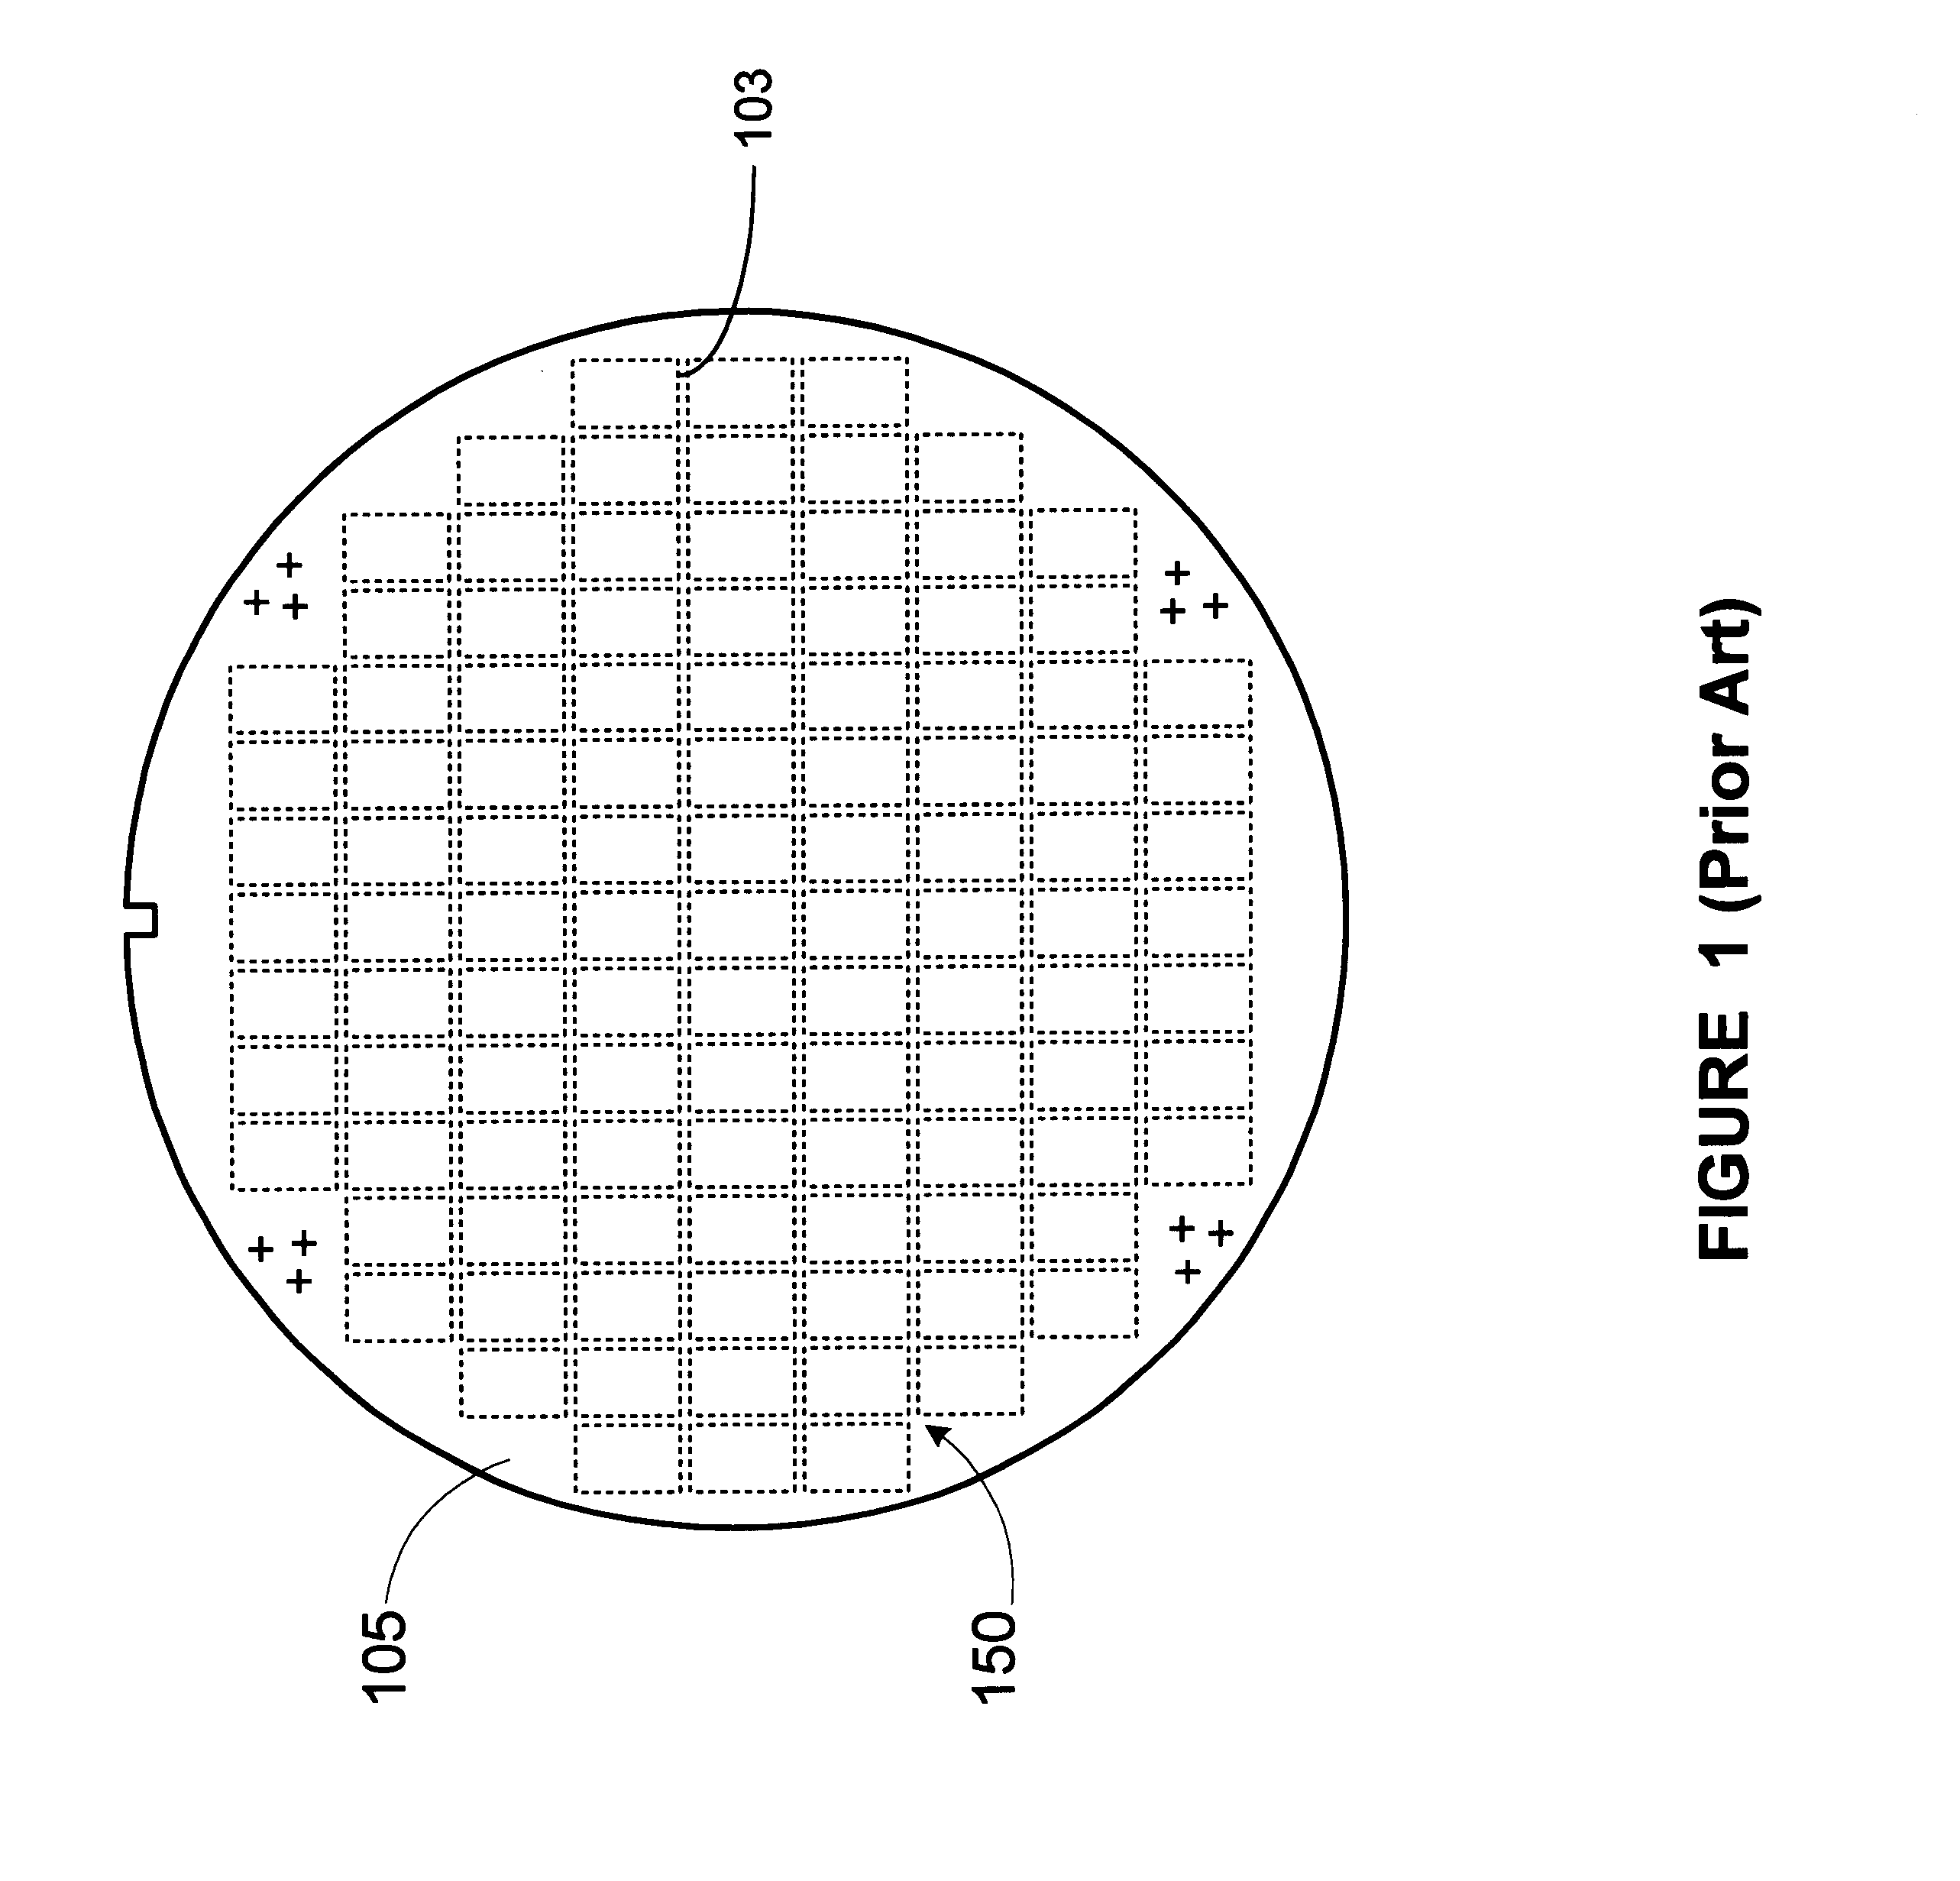 Method and apparatus for run-to-run control of trench profiles